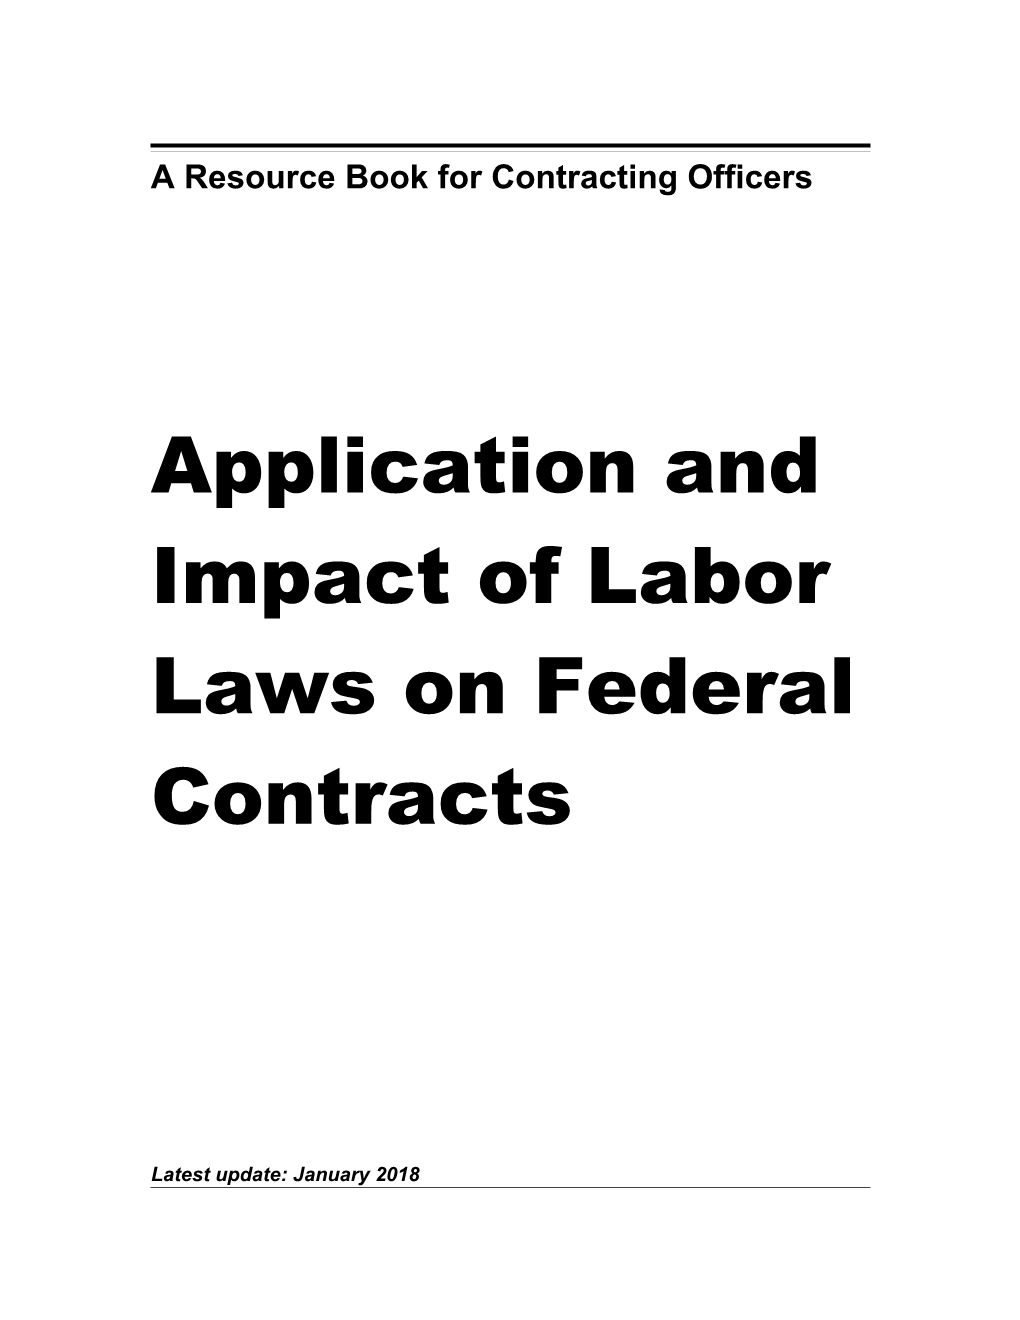 Application and Impact of Labor Laws on Federal Contracts